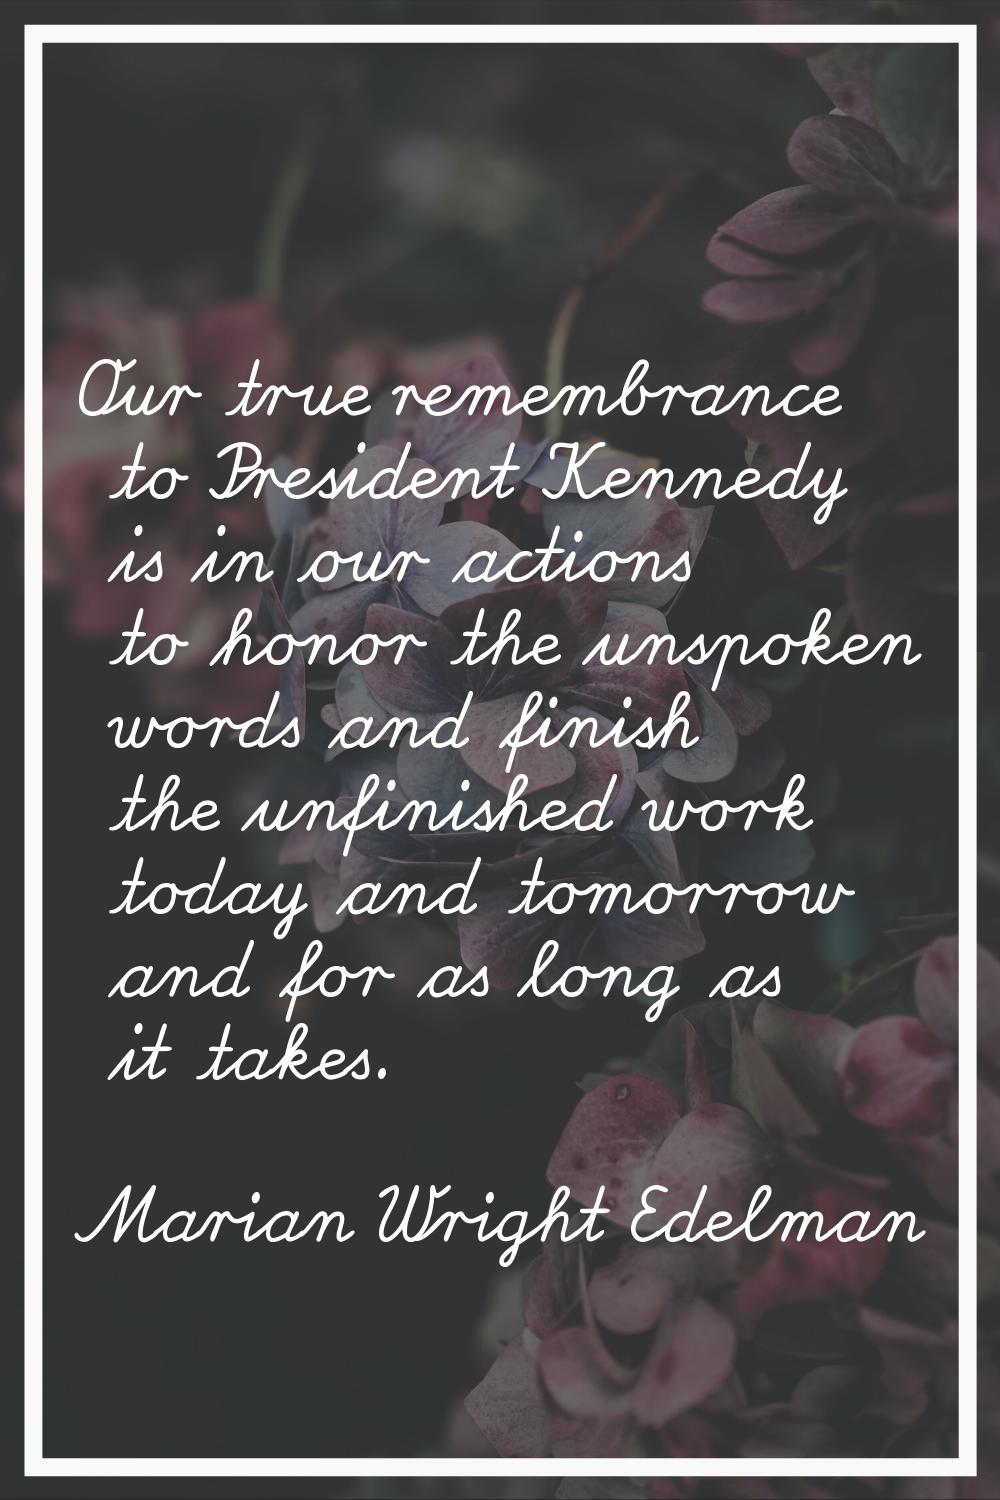 Our true remembrance to President Kennedy is in our actions to honor the unspoken words and finish 